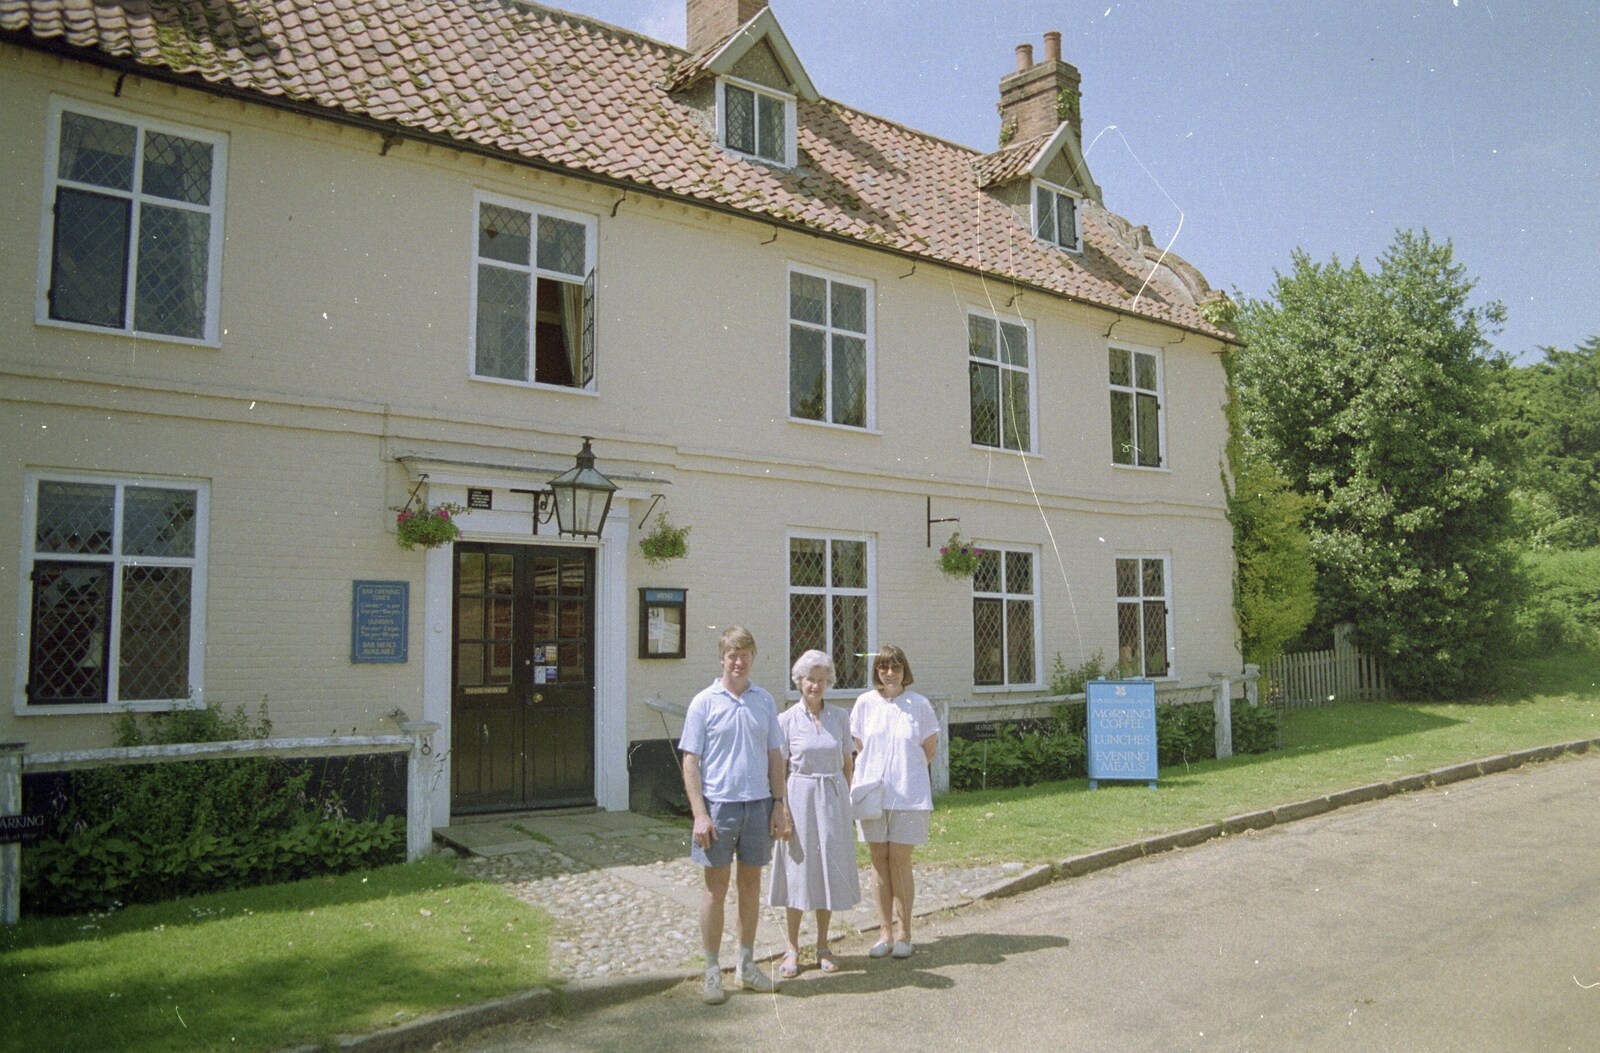 Grandmother, Neil and Caroline Visit, Brome and Orford, Suffolk - 24th July 1995: The pub next to Blickling Hall